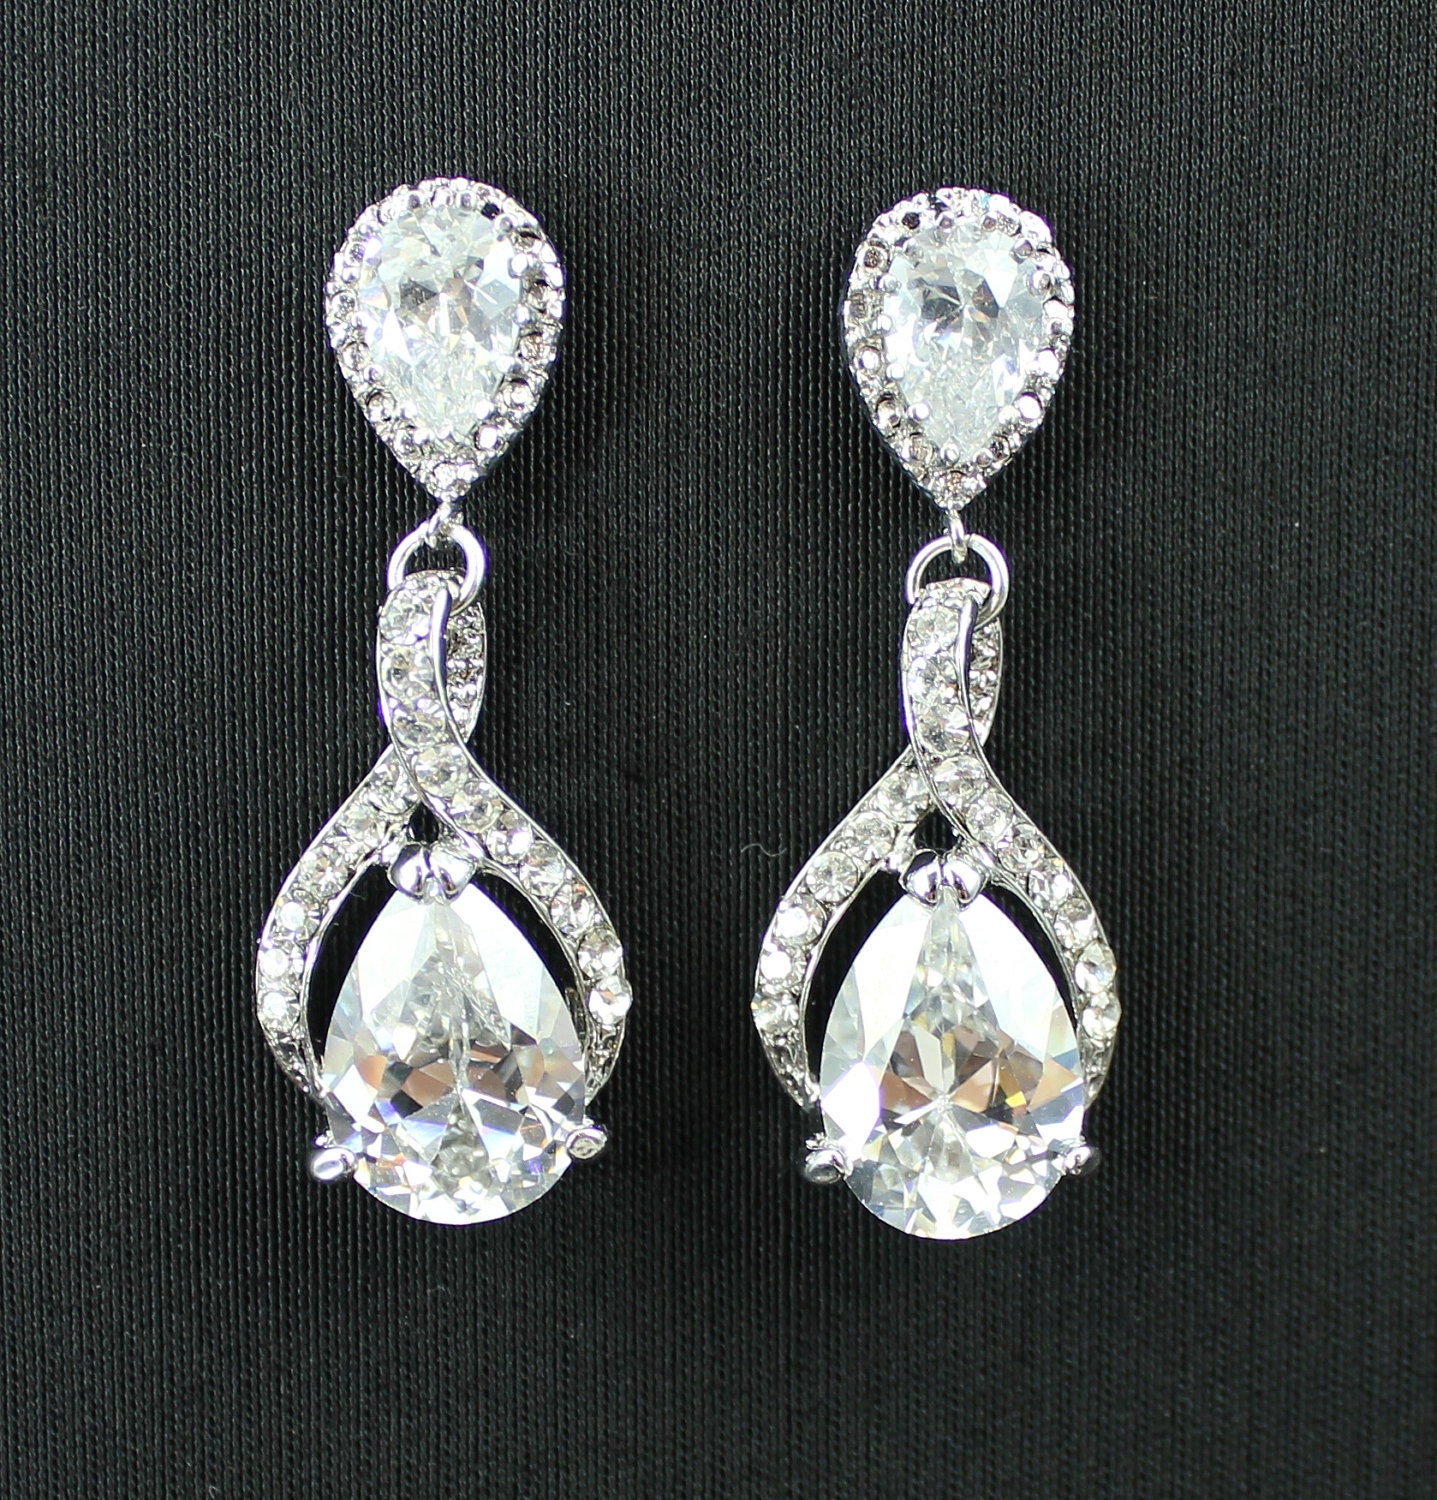 Bridal Crystal Earrings BRIDE Wedding Jewelry Bridesmaid GISELLE Be Frosted Collection